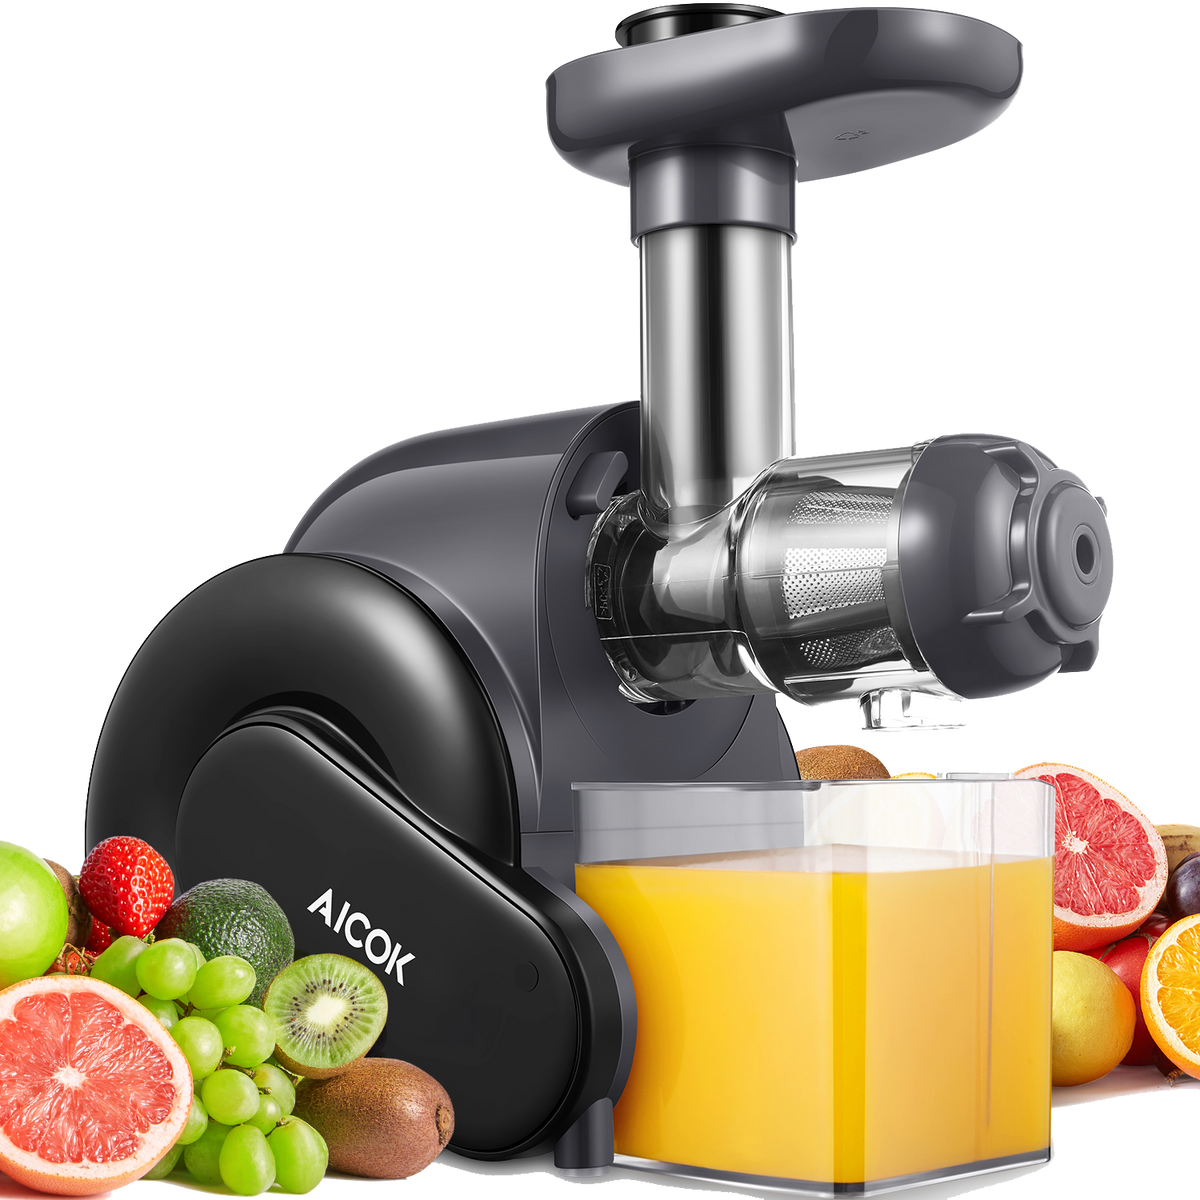 AICOK Juicer, Masticating Juice Extractor with Reverse Function, Cold Press Juicer with Juice Jug and Brush for High Nutrient Juice